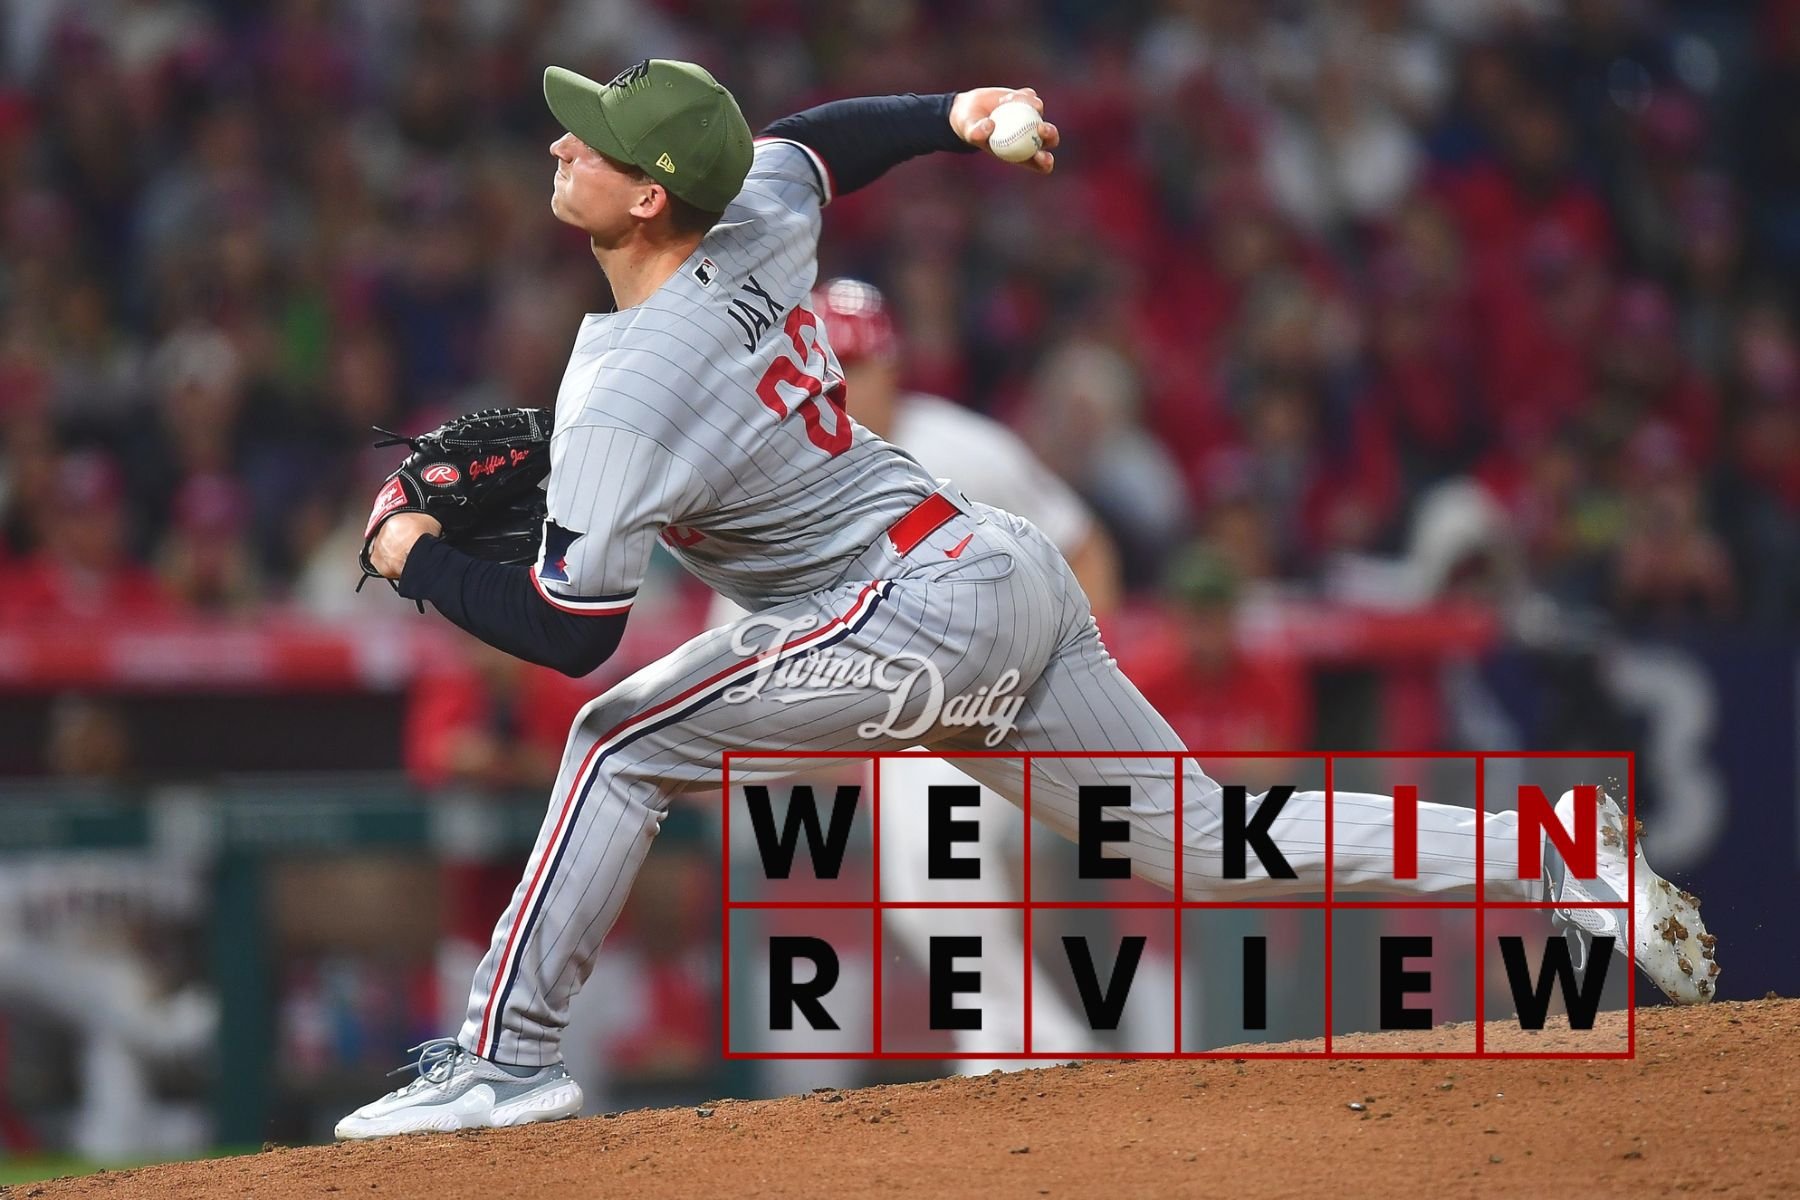 Week in Review: Wasted Opportunities Out West - Twins - Twins Daily